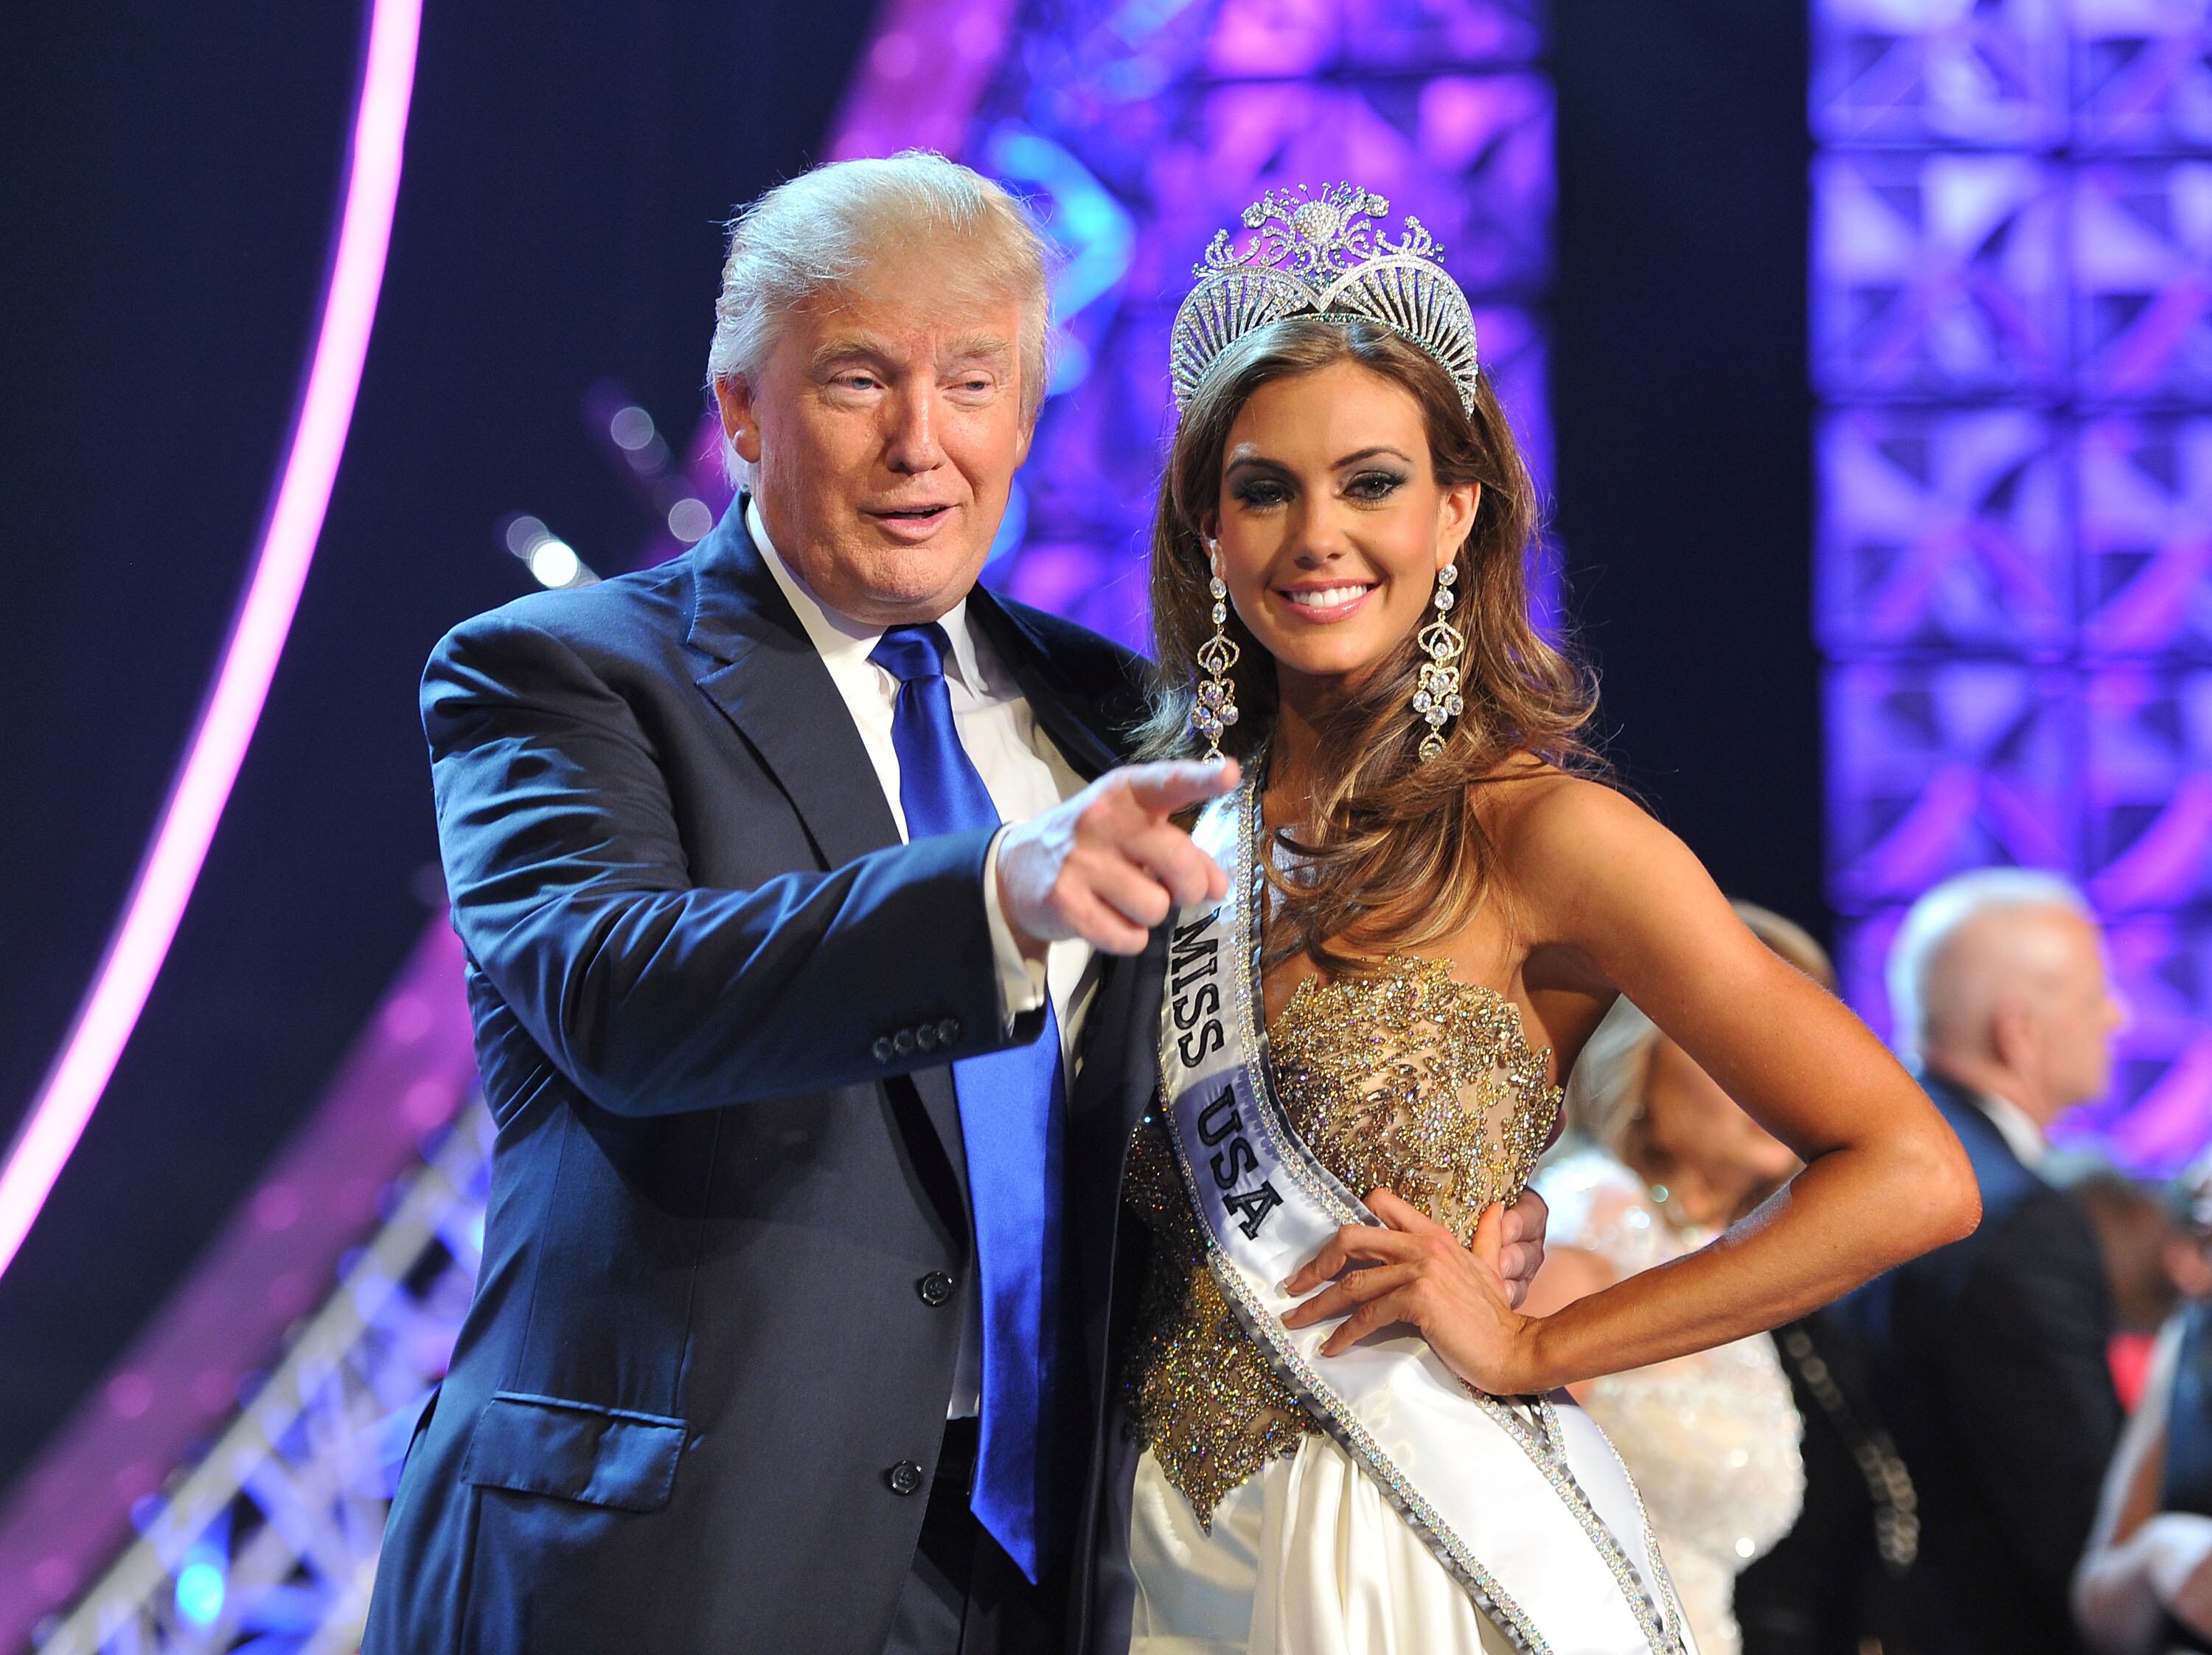 (Jeff Bottari | AP) In this June 16, 2013, file photo, Donald Trump, left, and Miss Connecticut USA Erin Brady pose onstage after Brady won the 2013 Miss USA pageant in Las Vegas. 